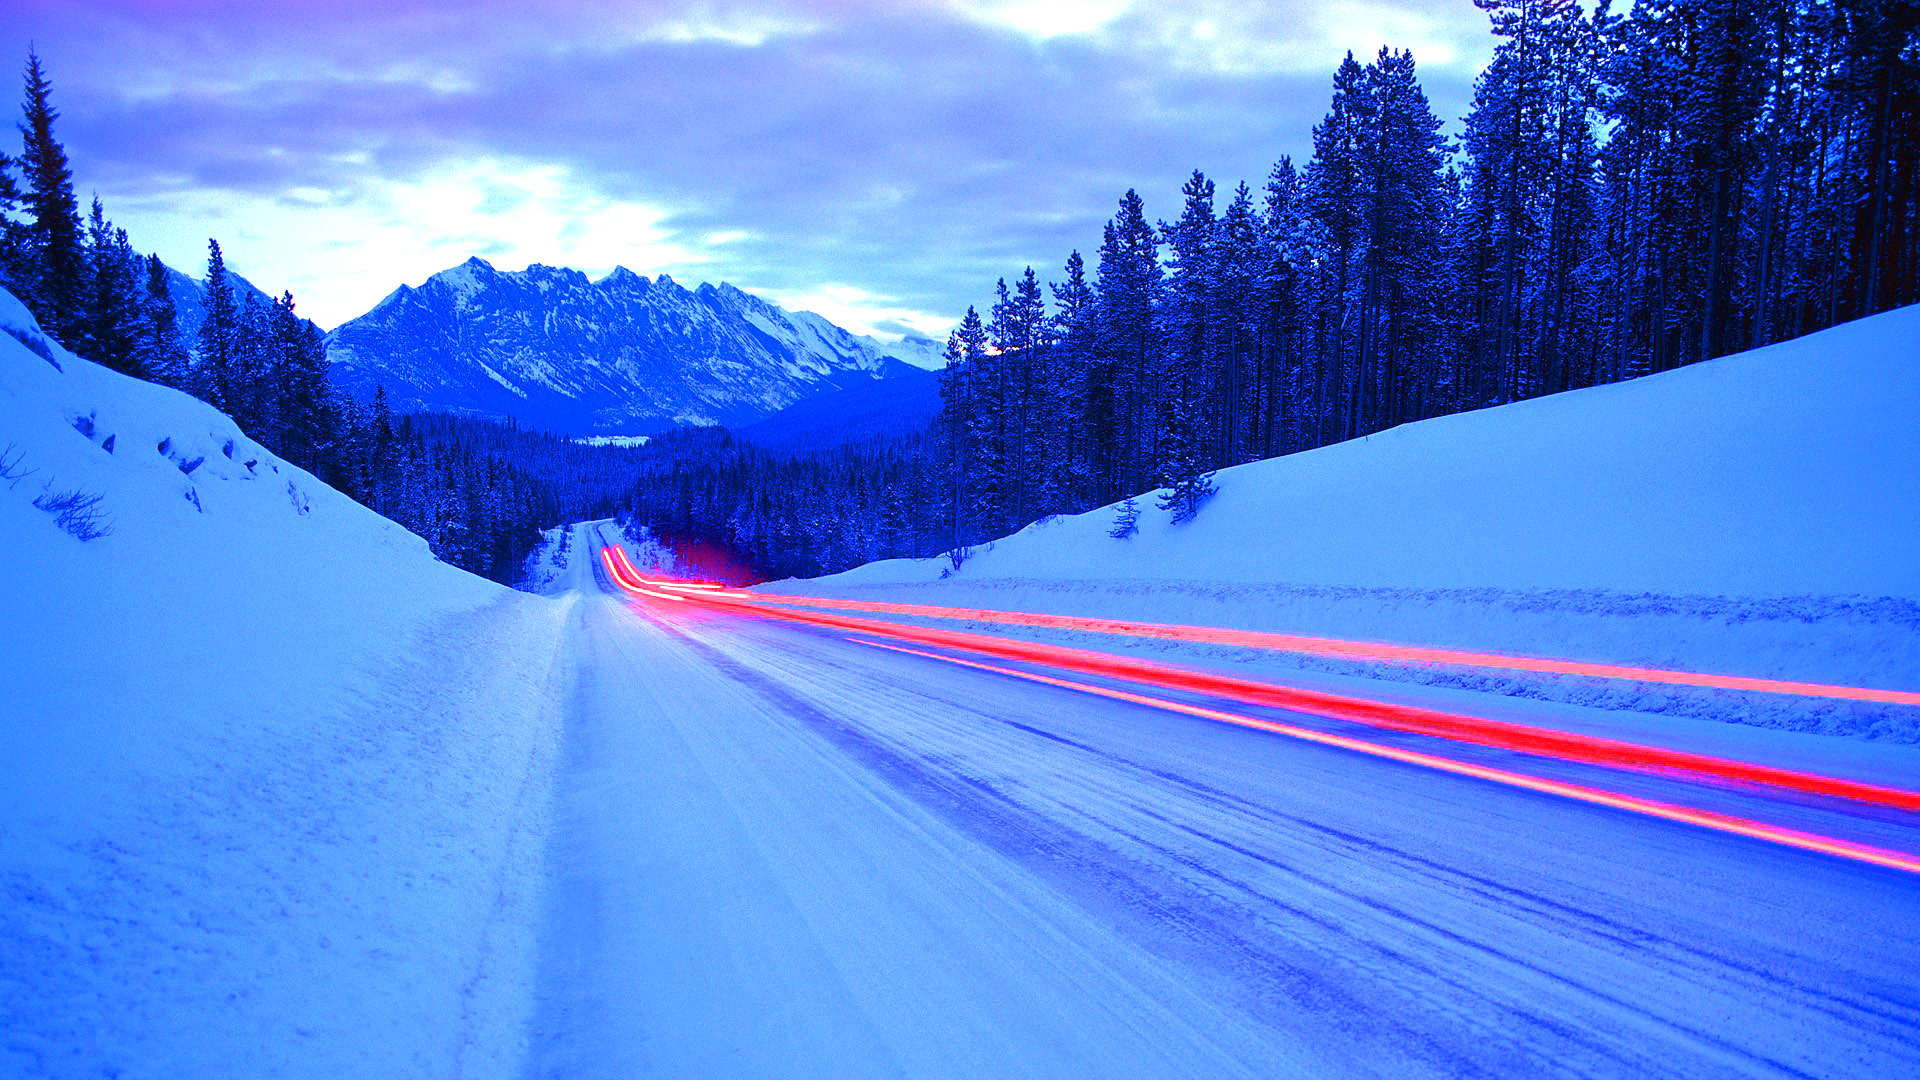 General 1920x1080 landscape nature snow long exposure light trails road traffic winter mountains